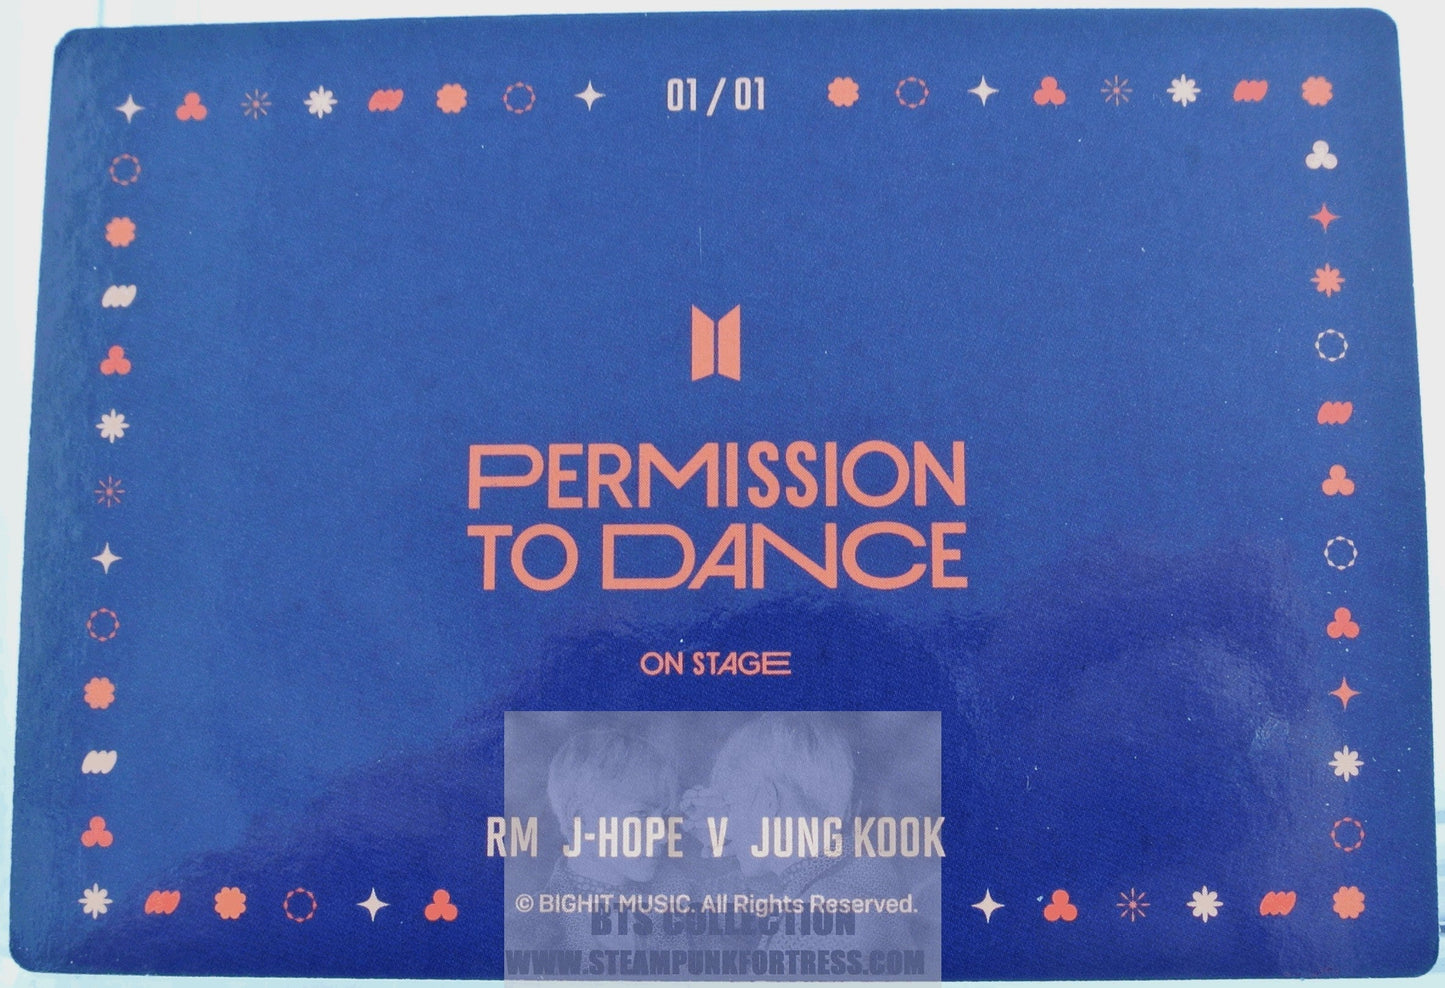 BTS PERMISSION TO DANCE ON STAGE SEOUL JUNGKOOK JEON V KIM TAEHYUNG JHOPE JUNG HOSEOK RM KIM NAMJOON 2022 PHOTOCARD PHOTO CARD #1 OF 1 NEW OFFICIAL MERCHANDISE